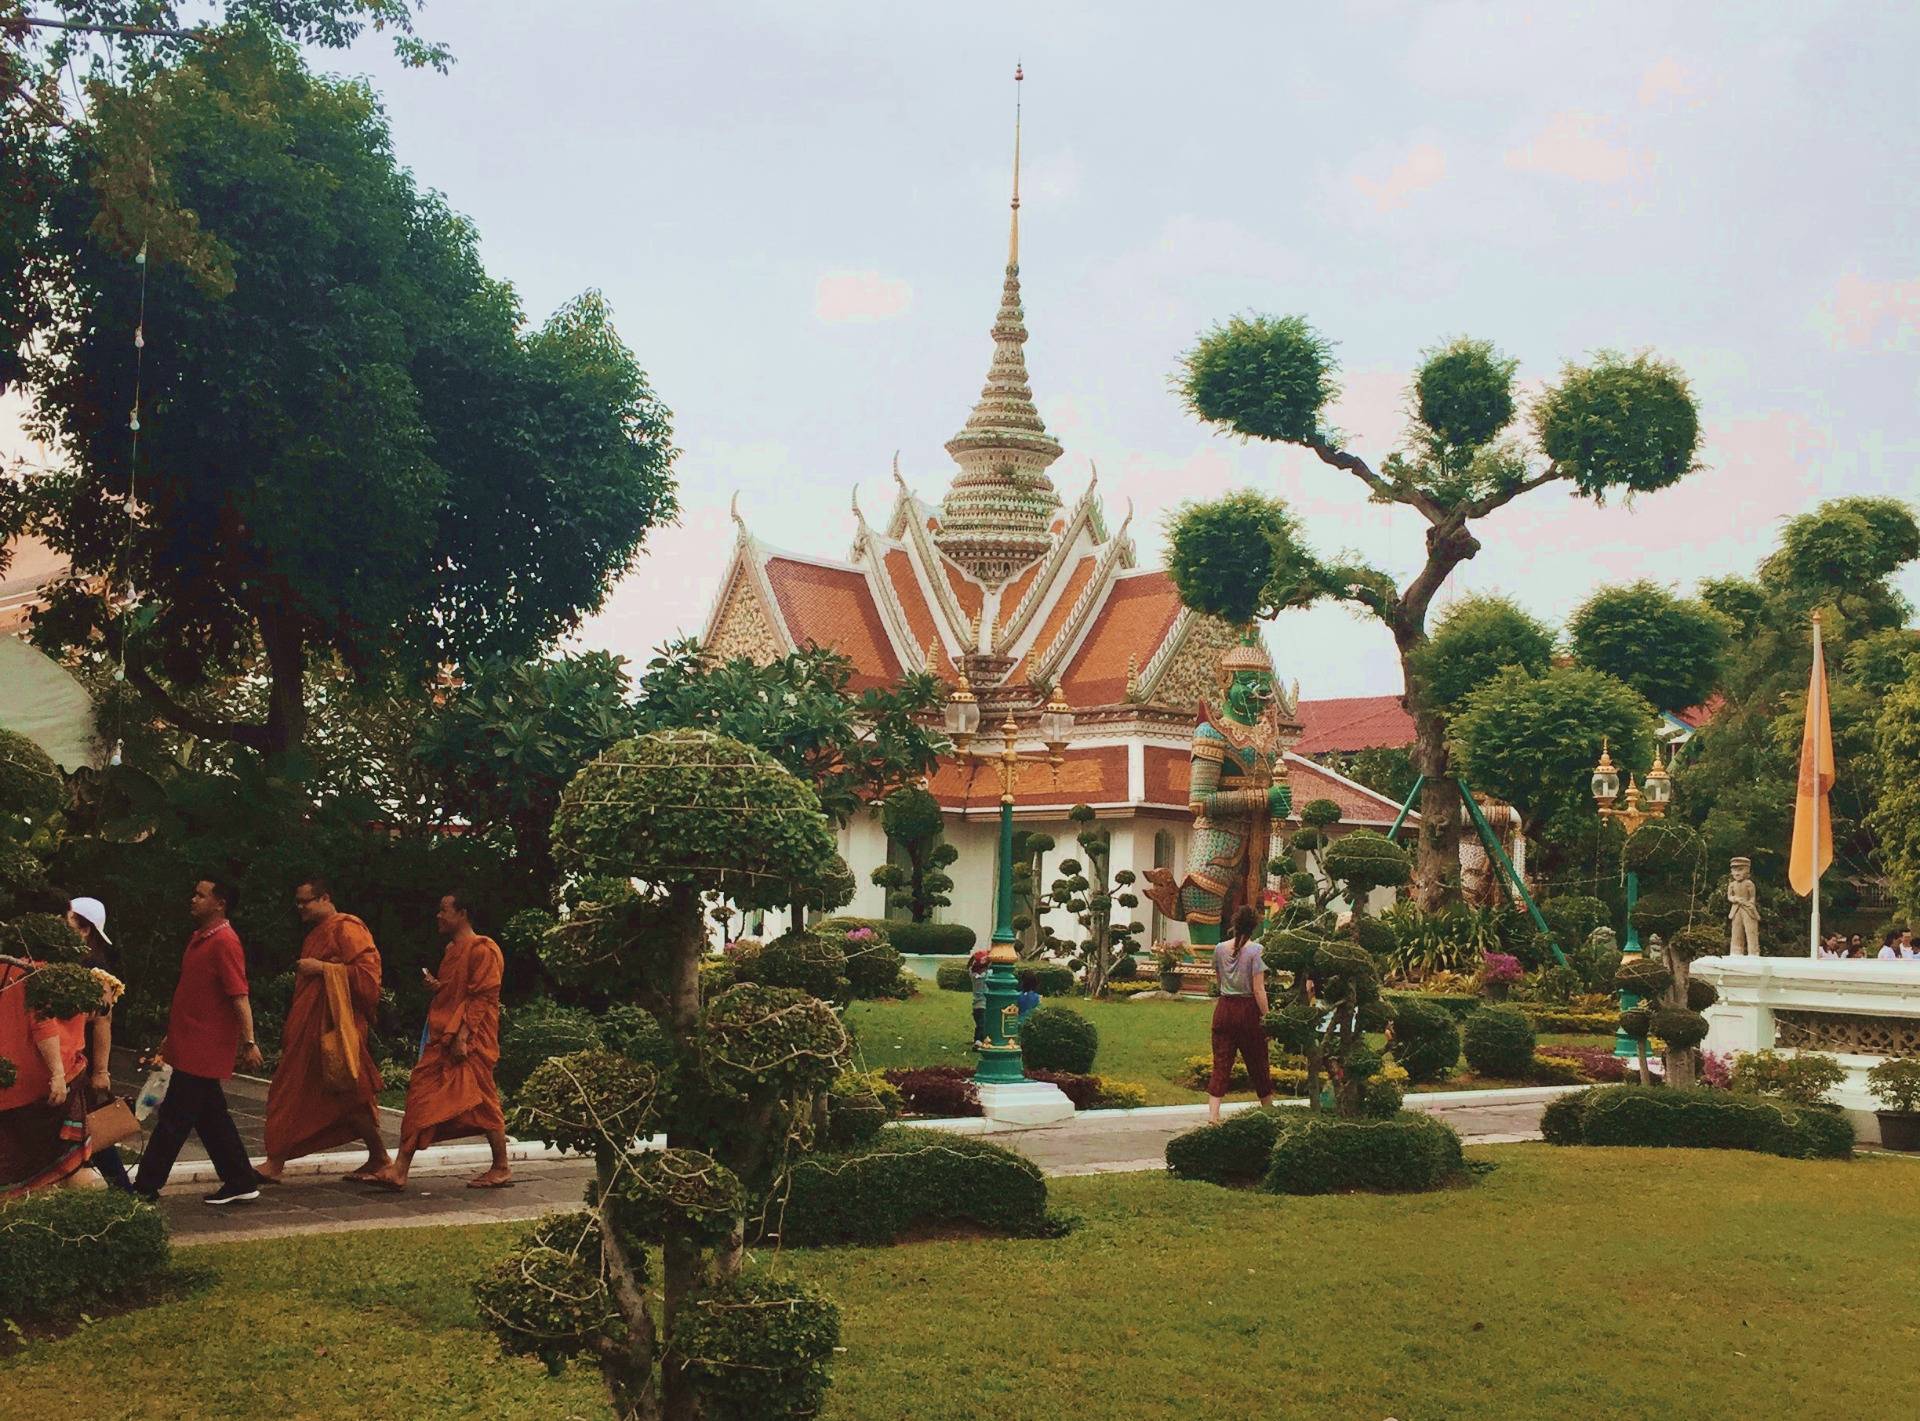 Exploring the surroundings of Wat Arun - there is so much to see!